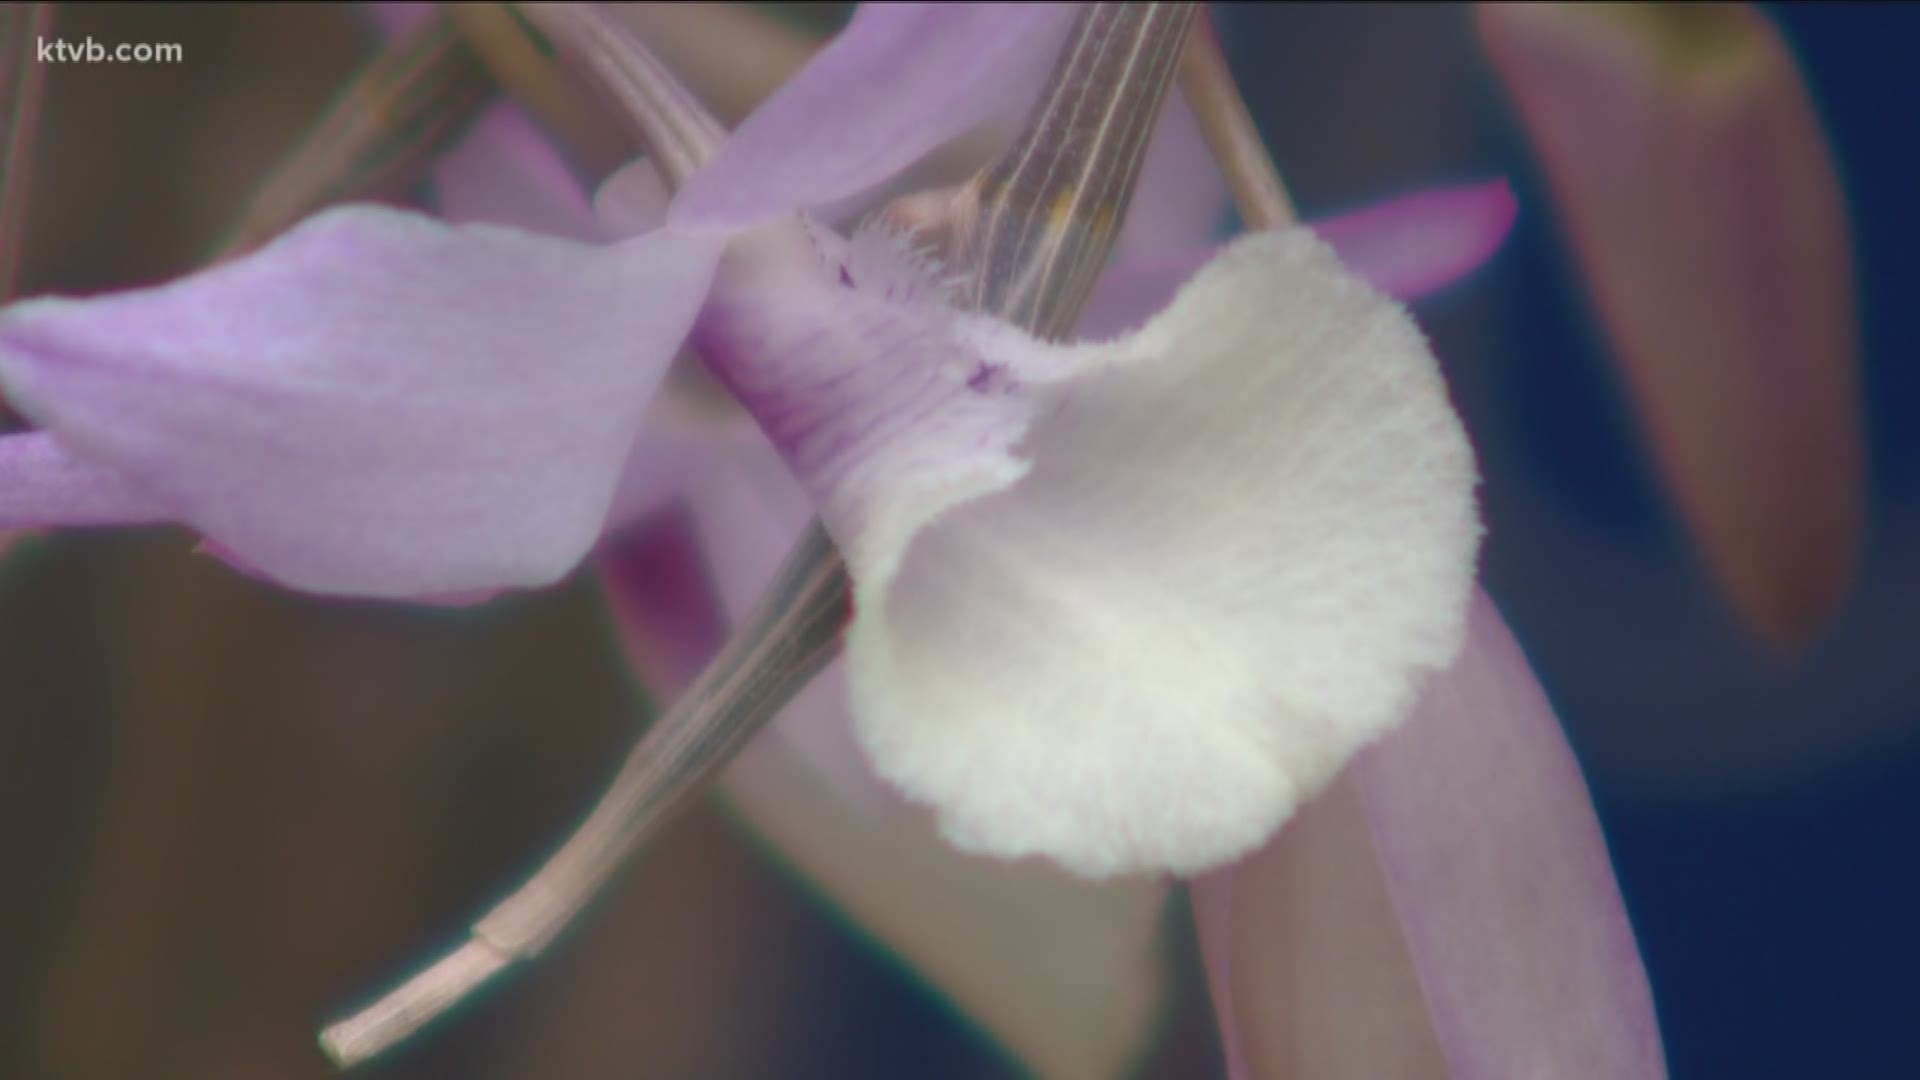 Jim Duthie takes us to a local greenhouse to learn more about growing orchids.